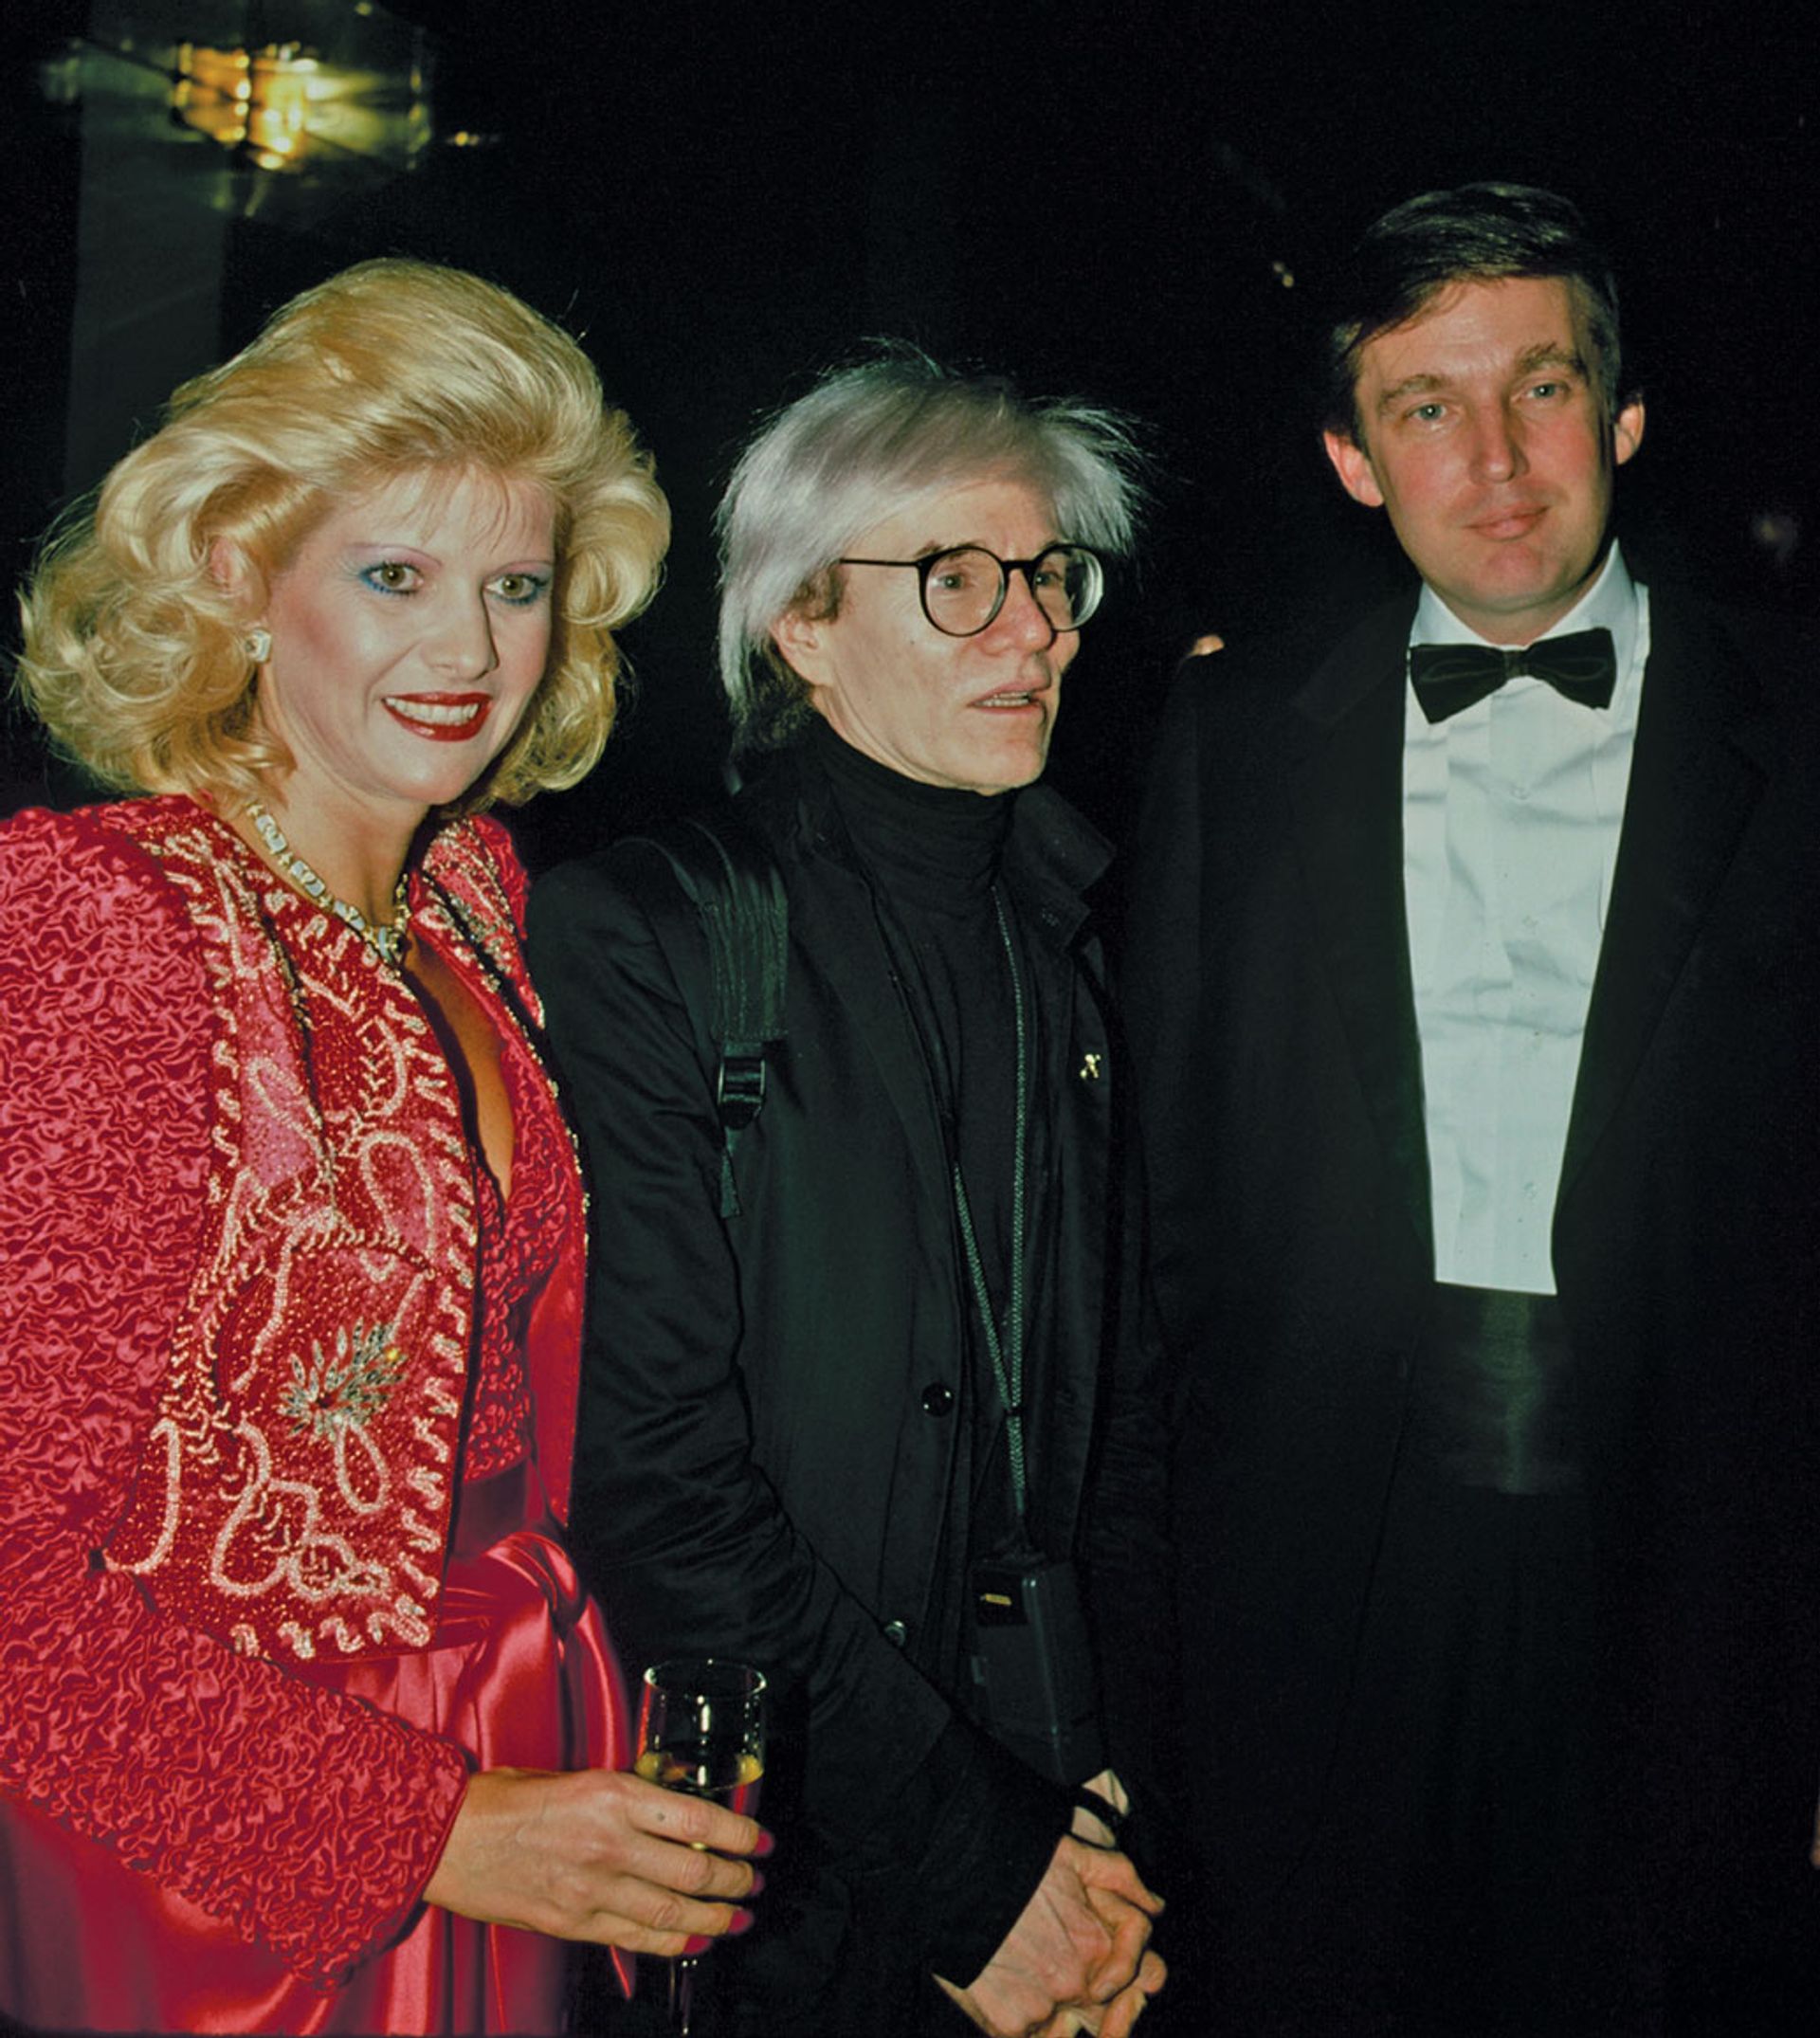 Ivana and Donald Trump turned down Warhol’s works The LIFE Picture Collection/Getty Images